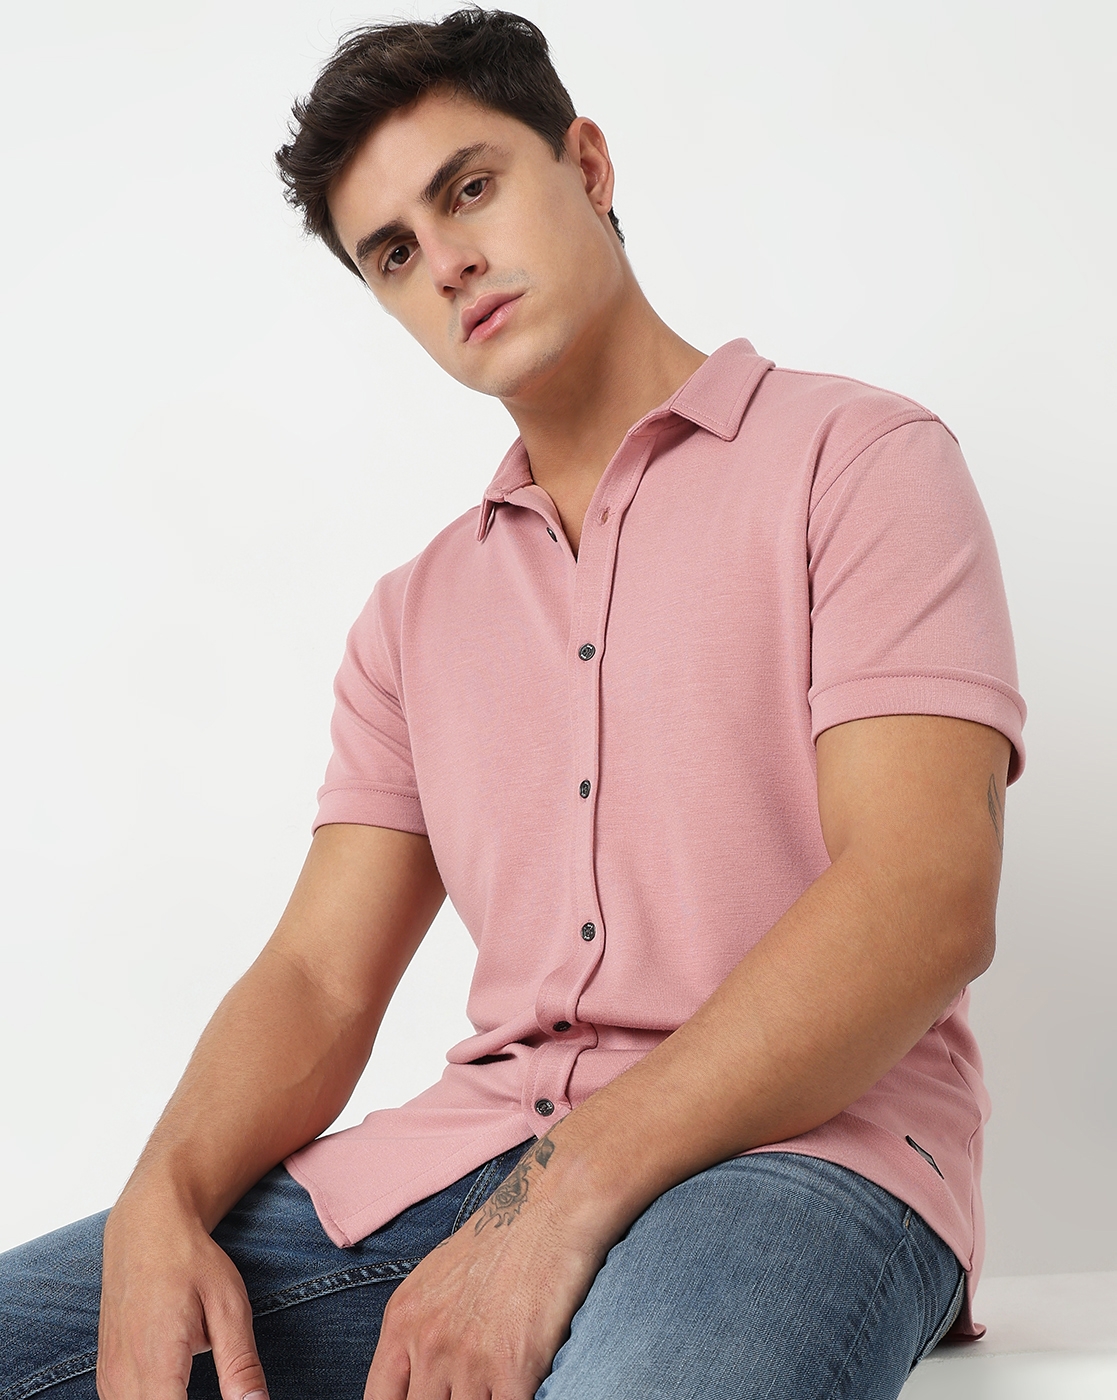 GAS | Slim Fit Solid Short Sleeve Shirt with Classic Collar